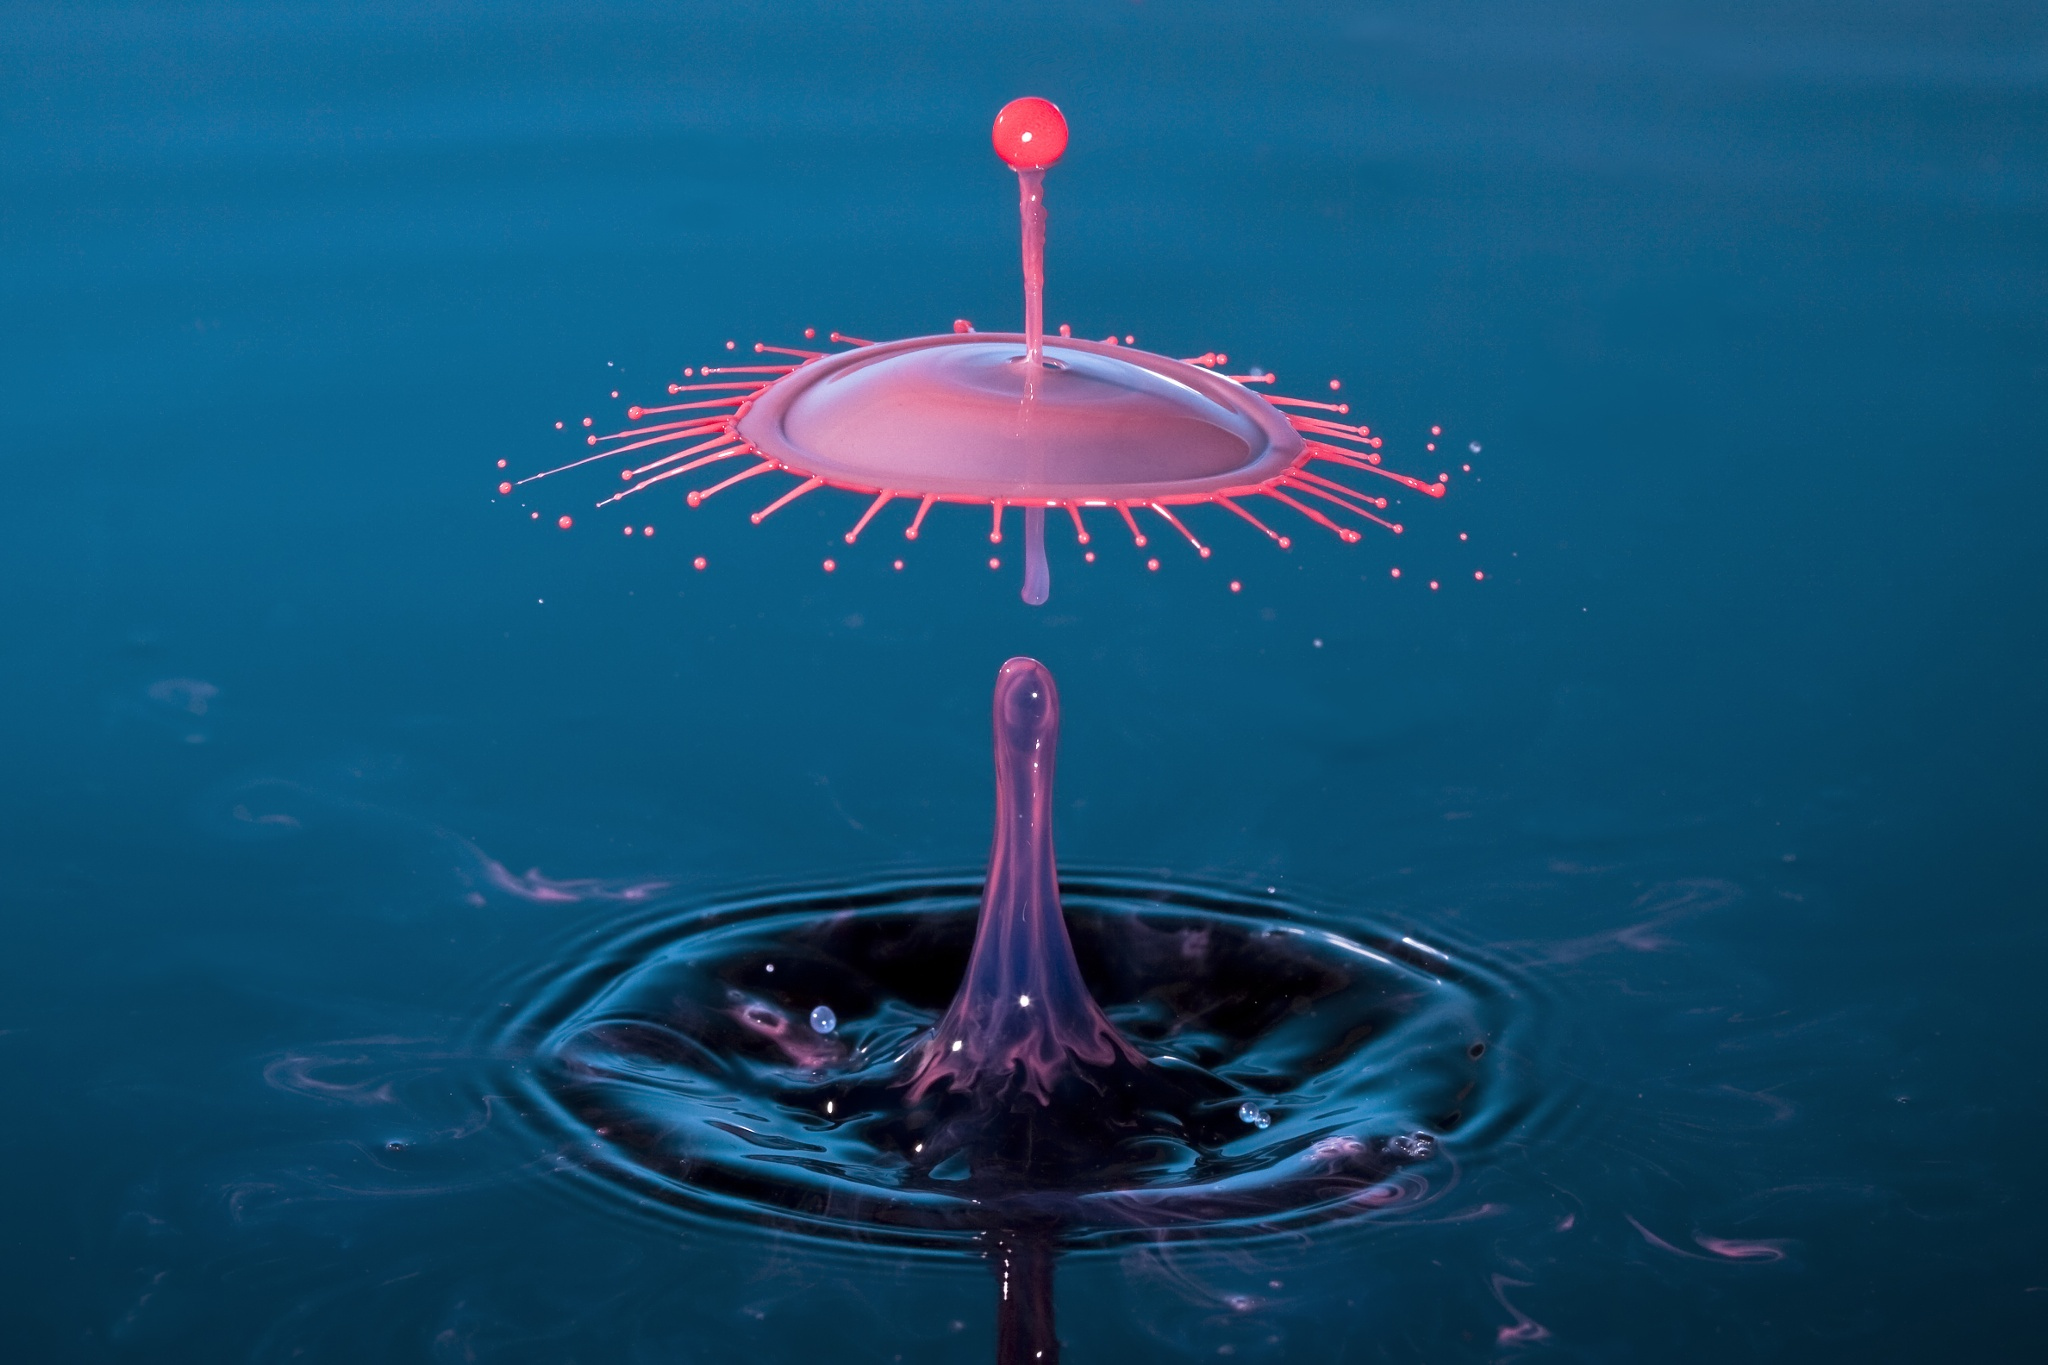 waterdrop 2 by 500 px blog abstract photography